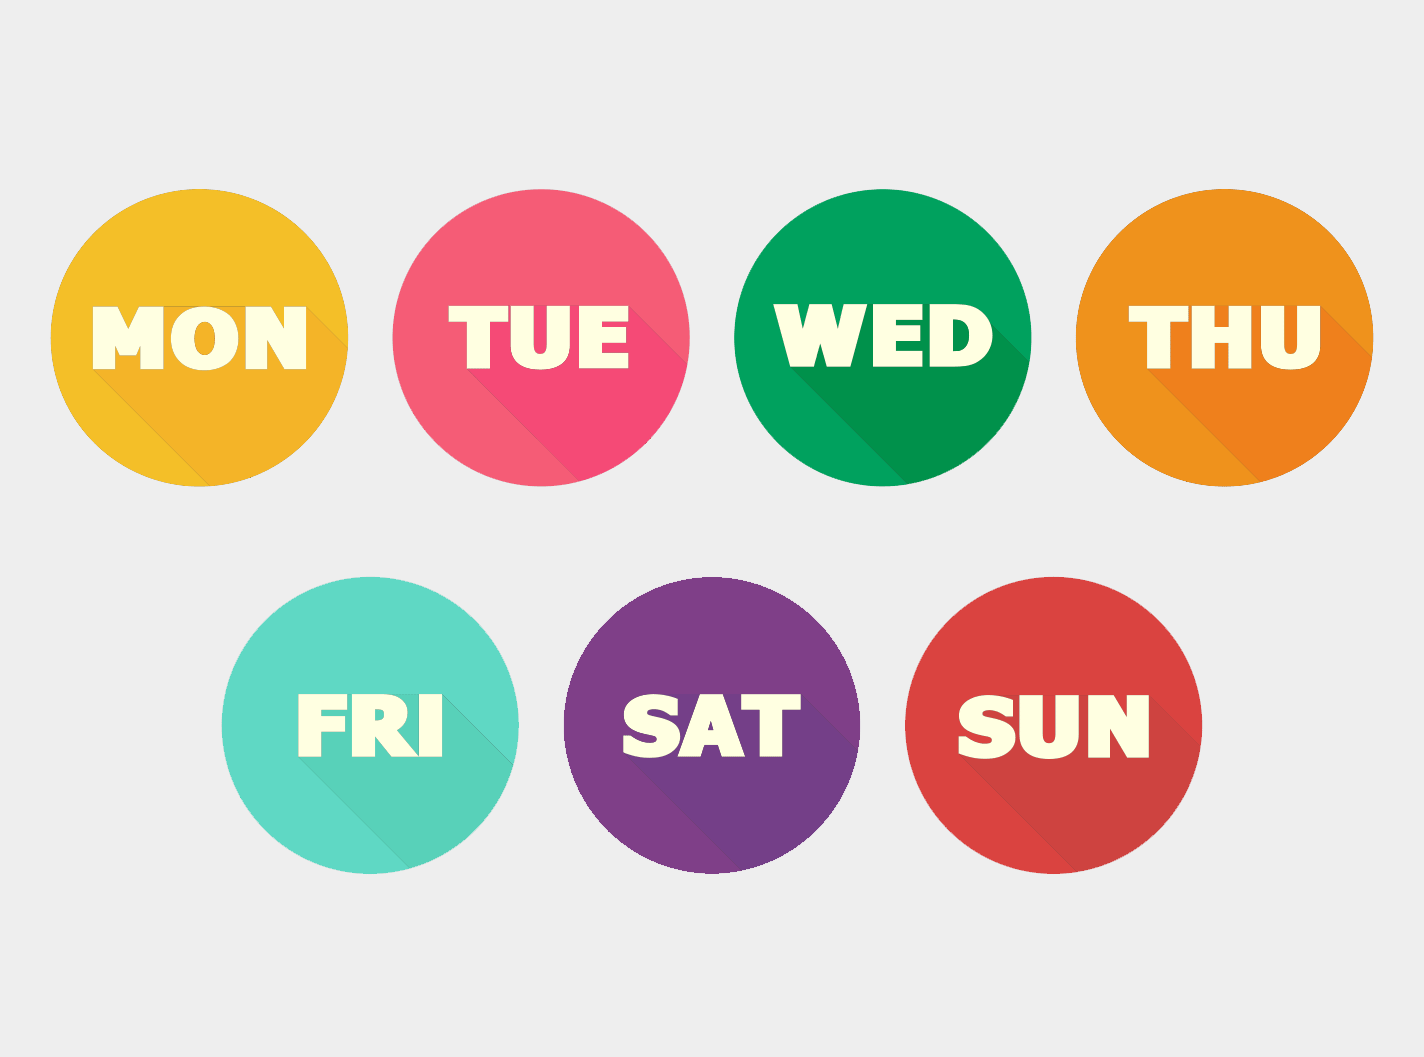 Days of the Week in Russian